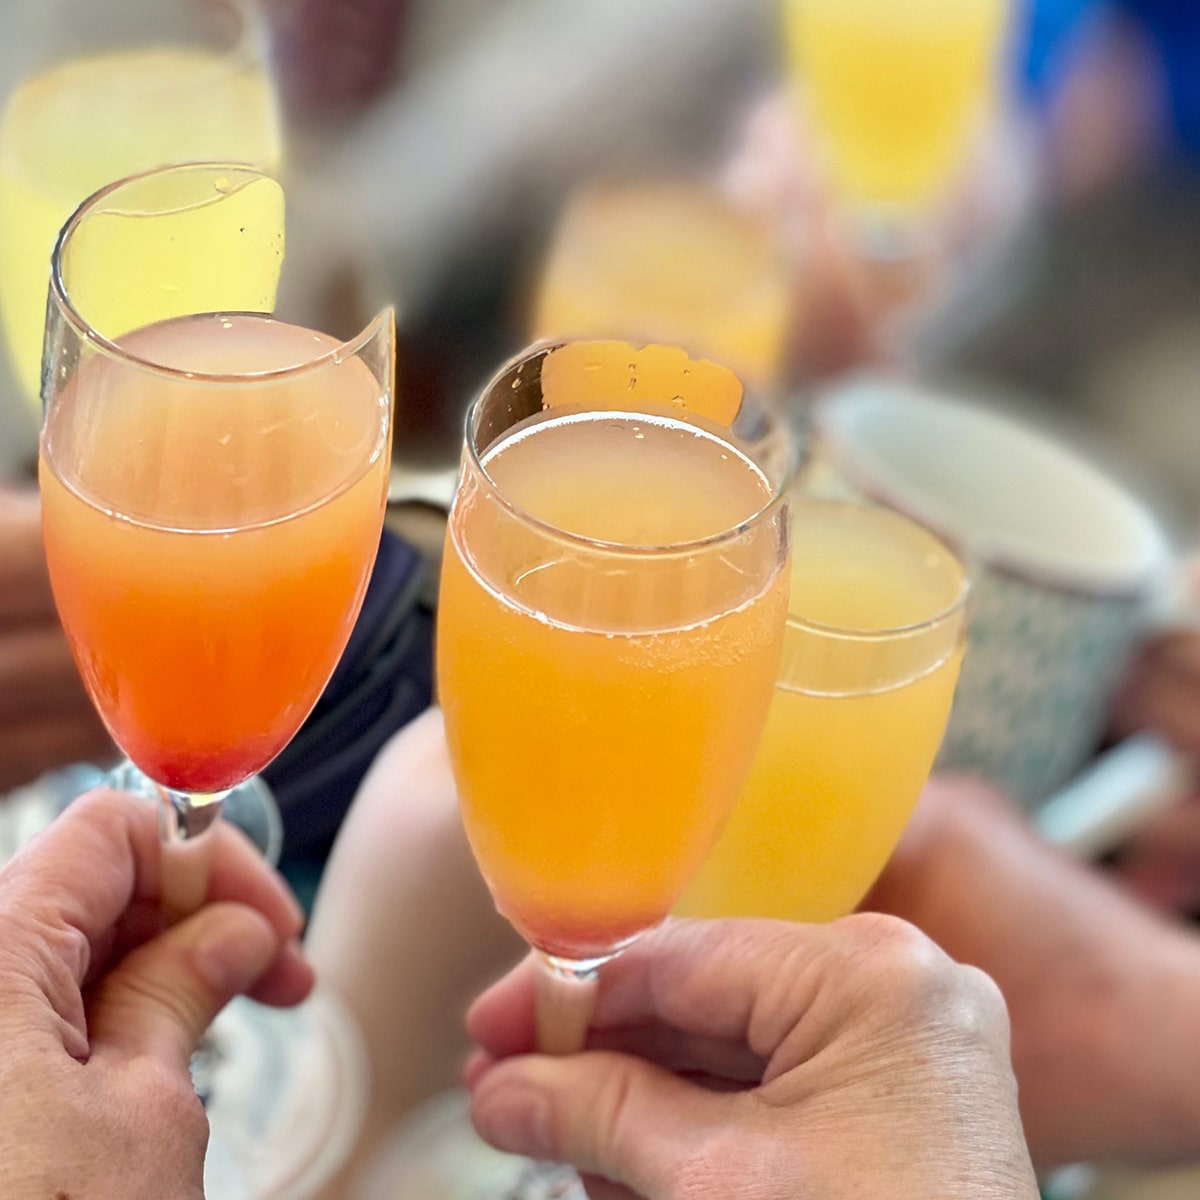 Several people holding champagne glasses filled with peach puree and champagne.